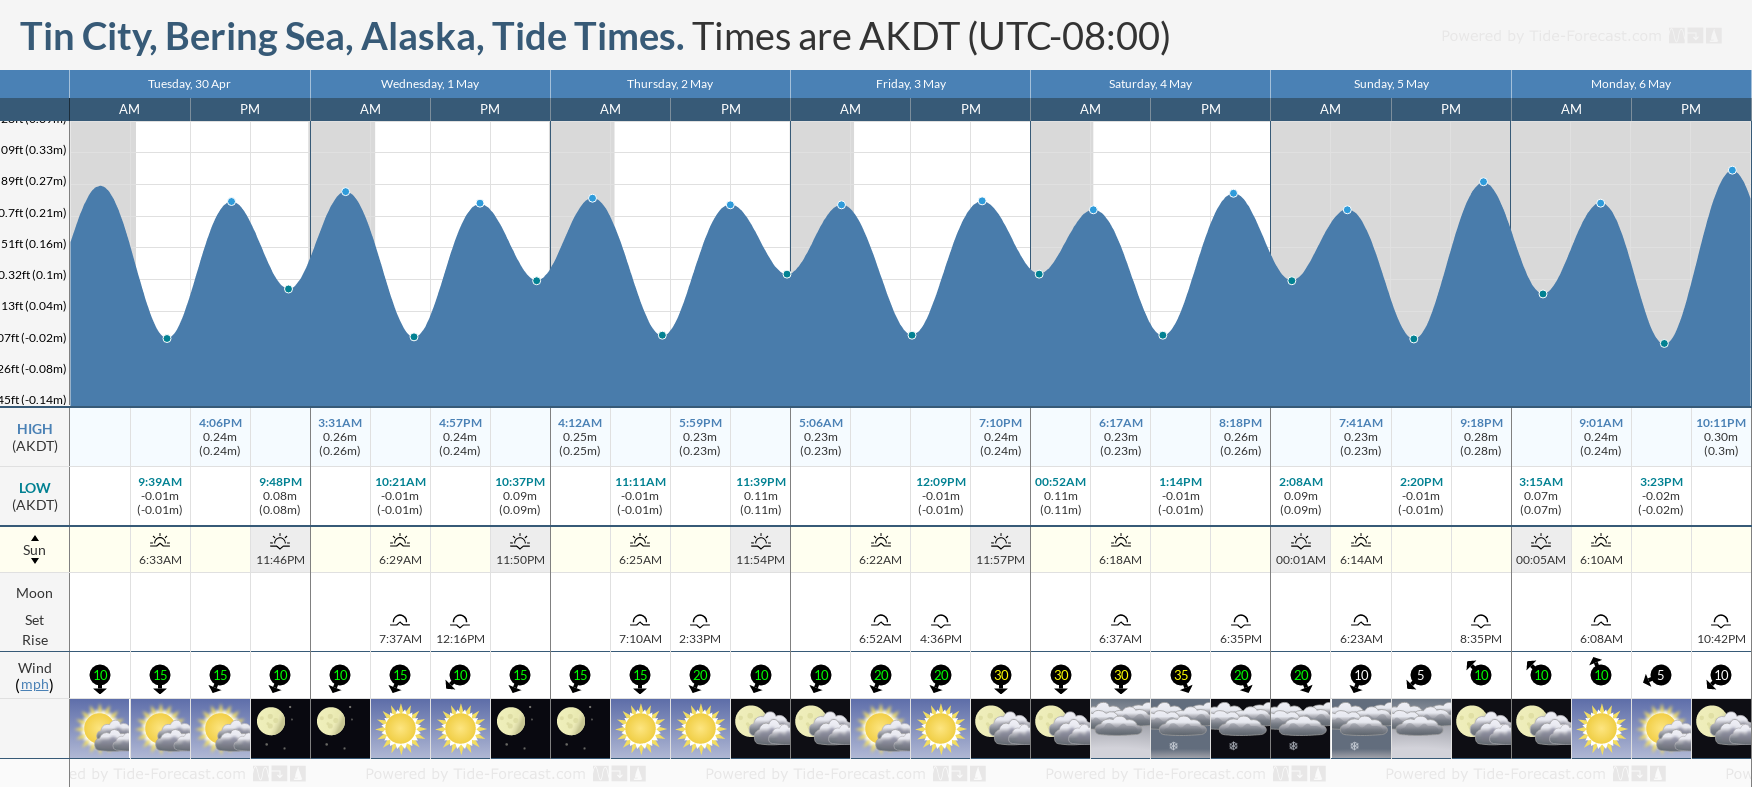 Tin City, Bering Sea, Alaska Tide Chart including high and low tide tide times for the next 7 days